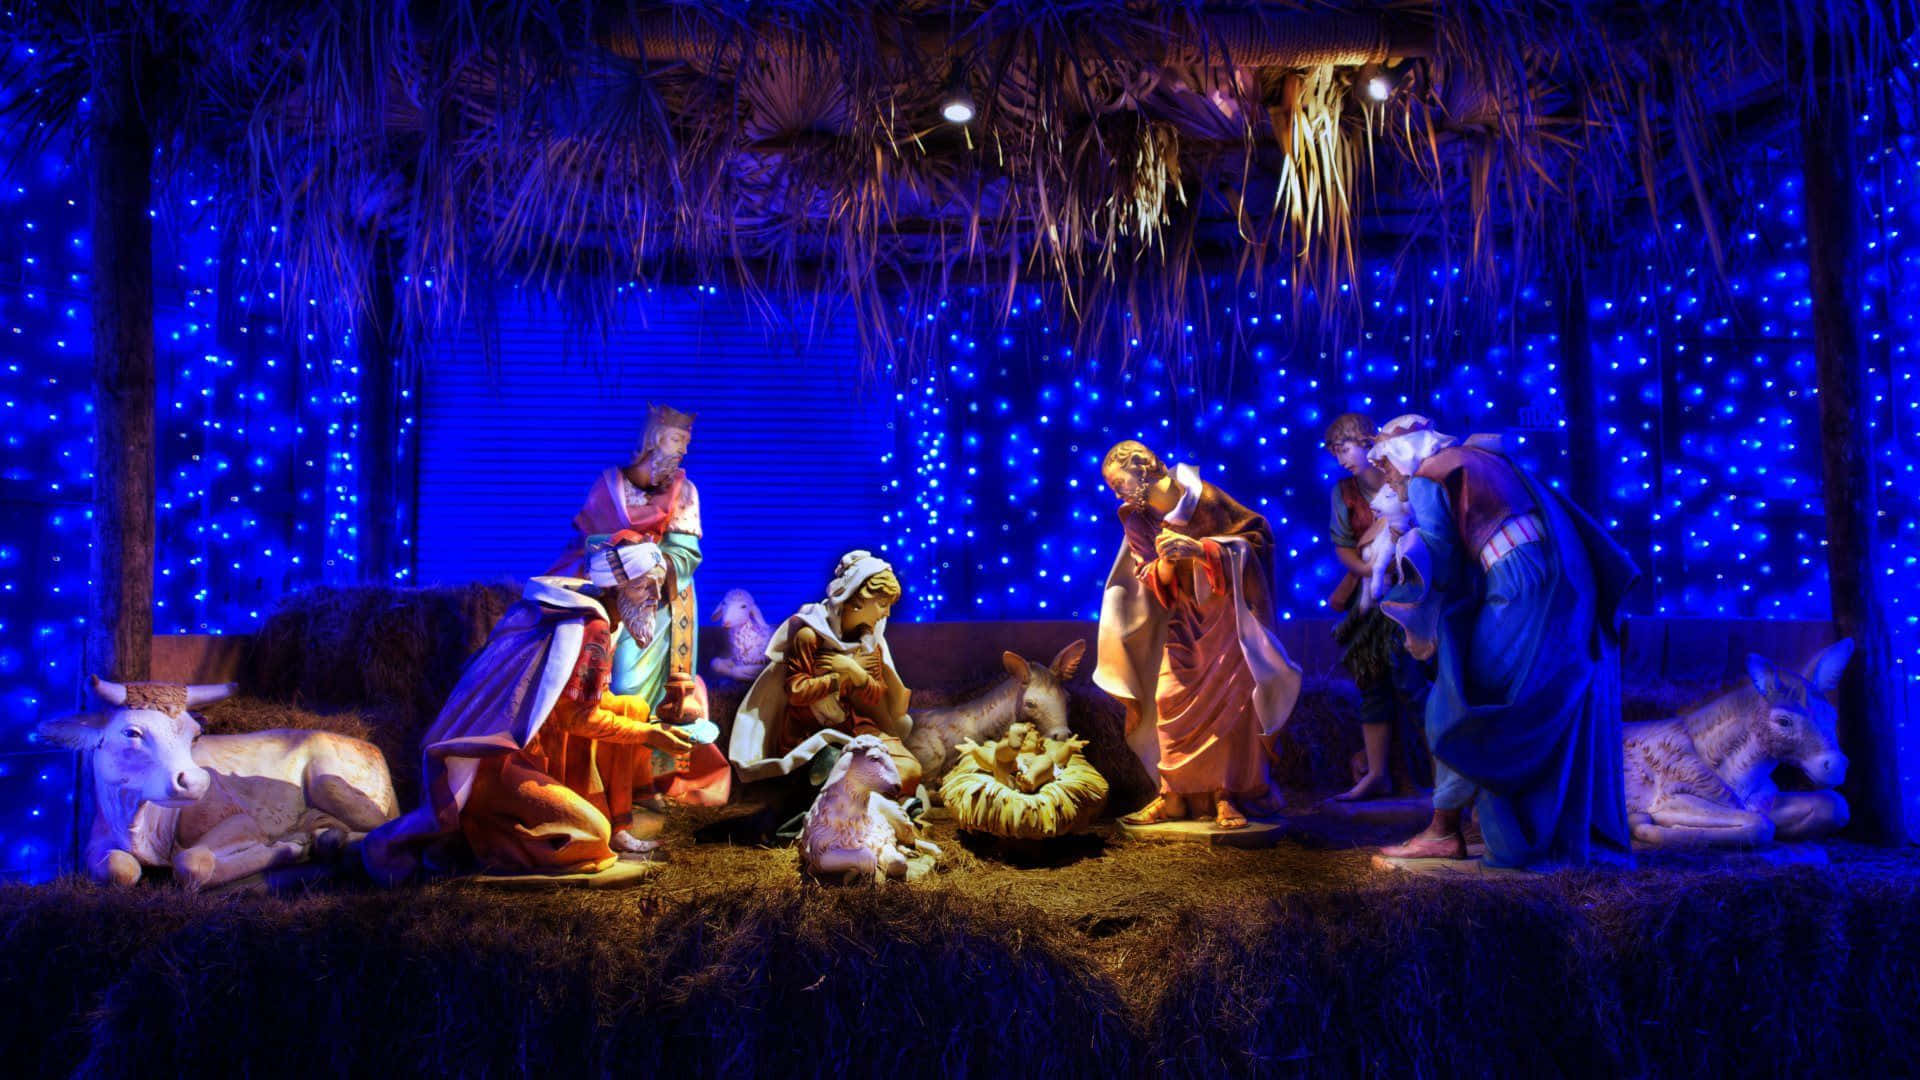 Celebrating the true meaning of Christmas: The Nativity Scene